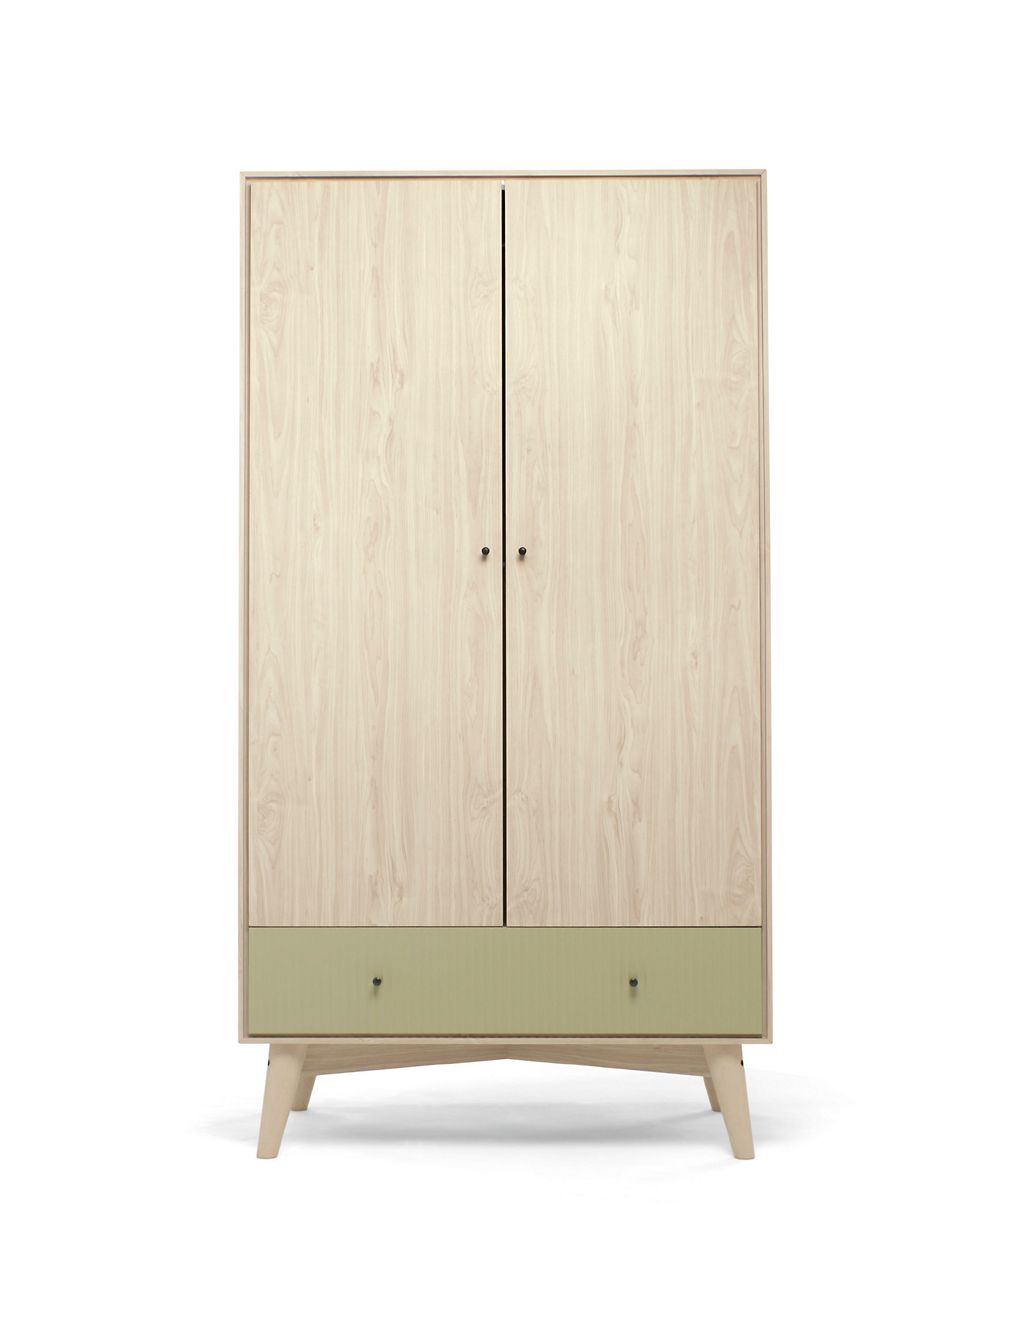 Coxley 3 Piece Cotbed Range with Dresser and Wardrobe 7 of 9